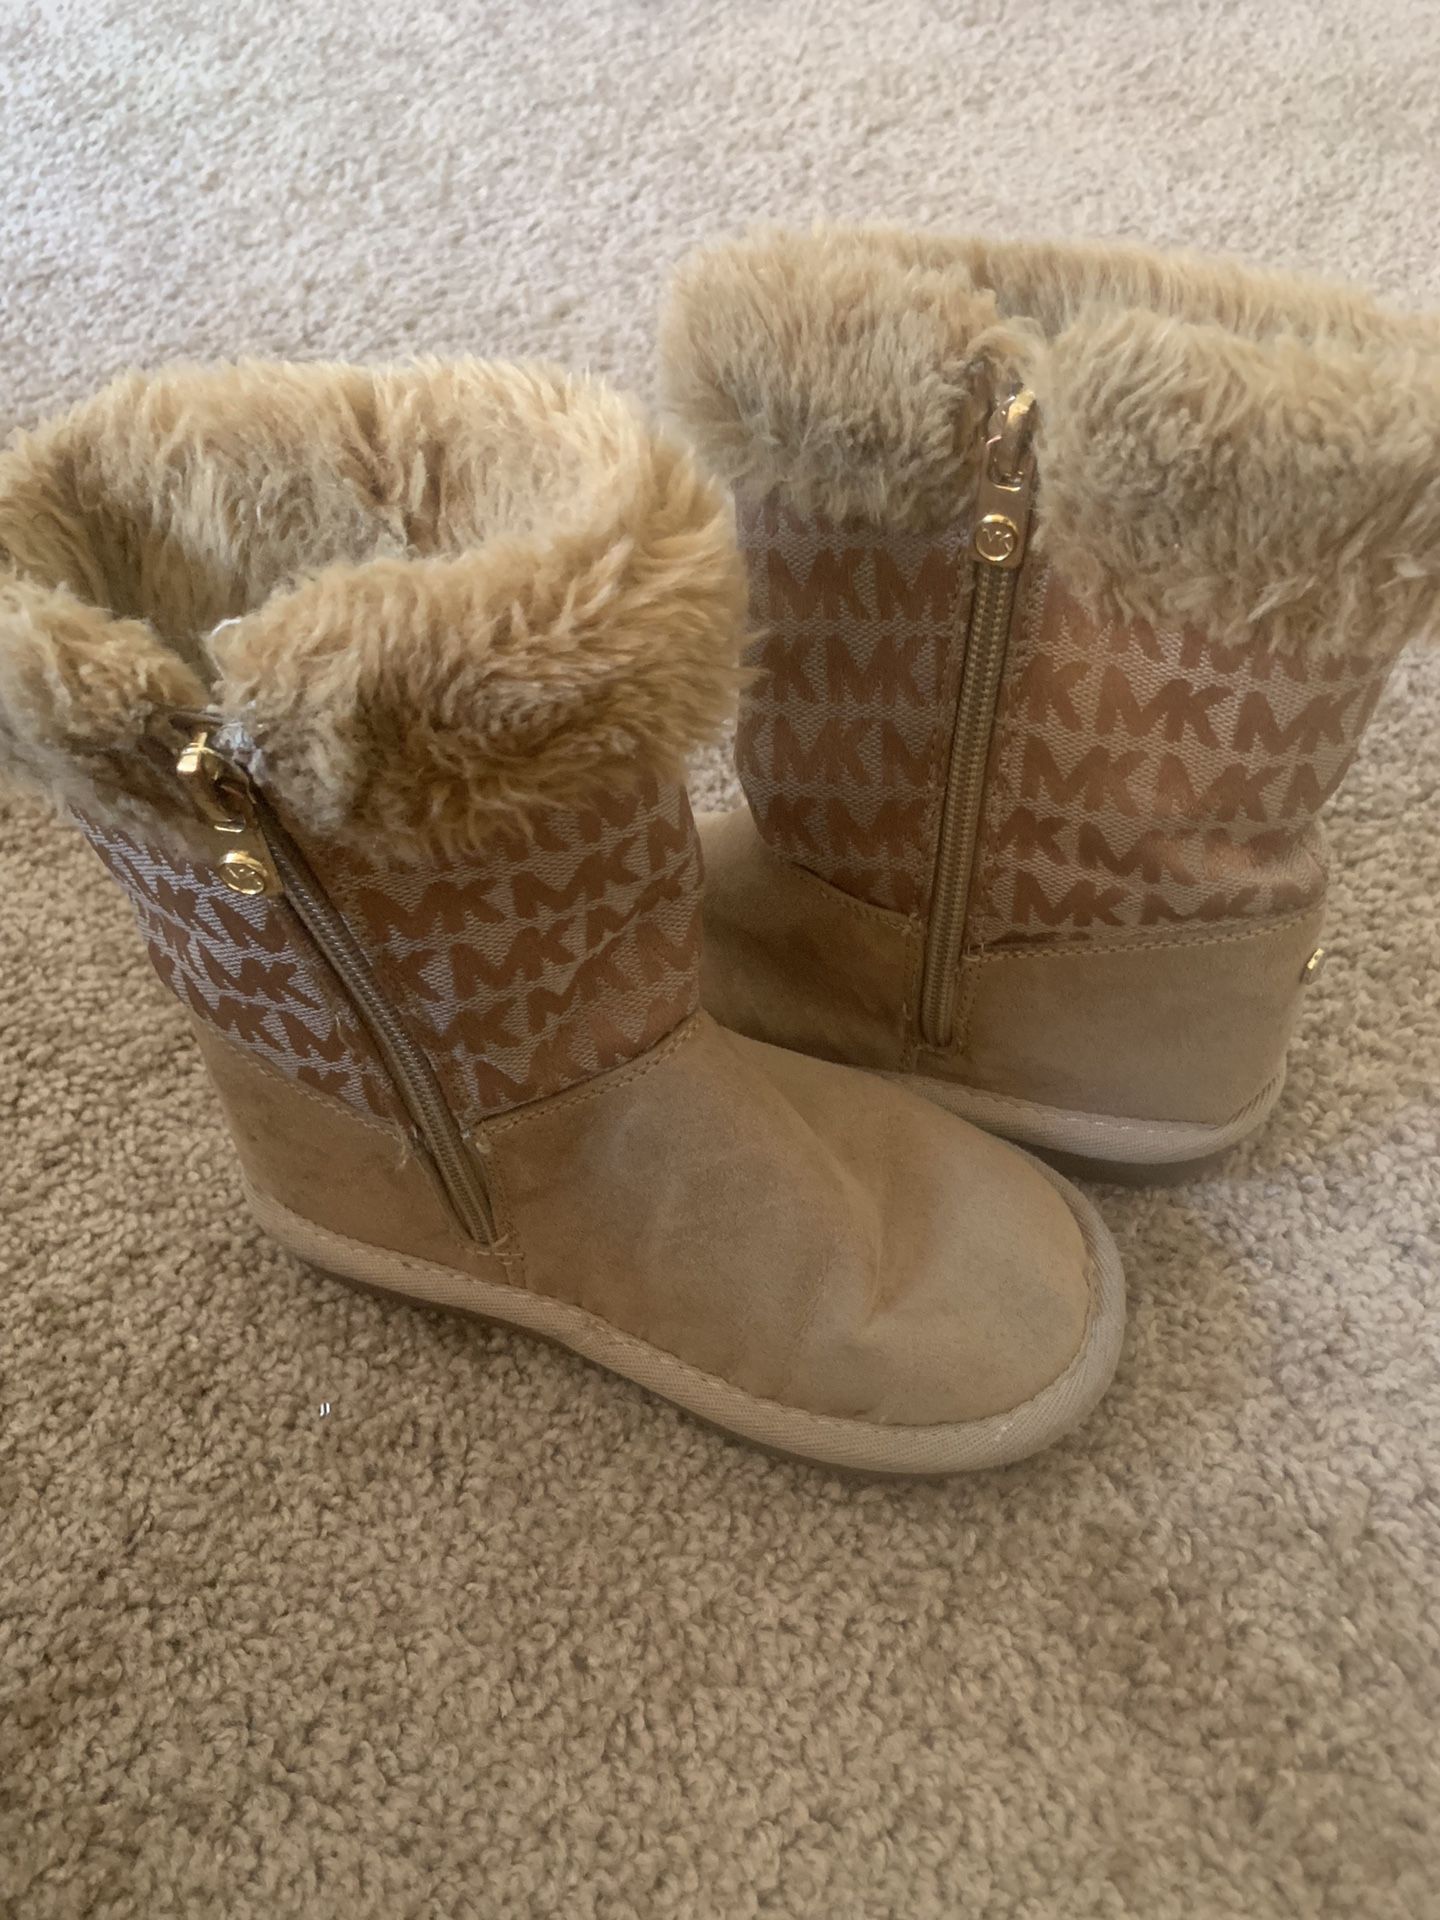 Michael Kors boots for toddler